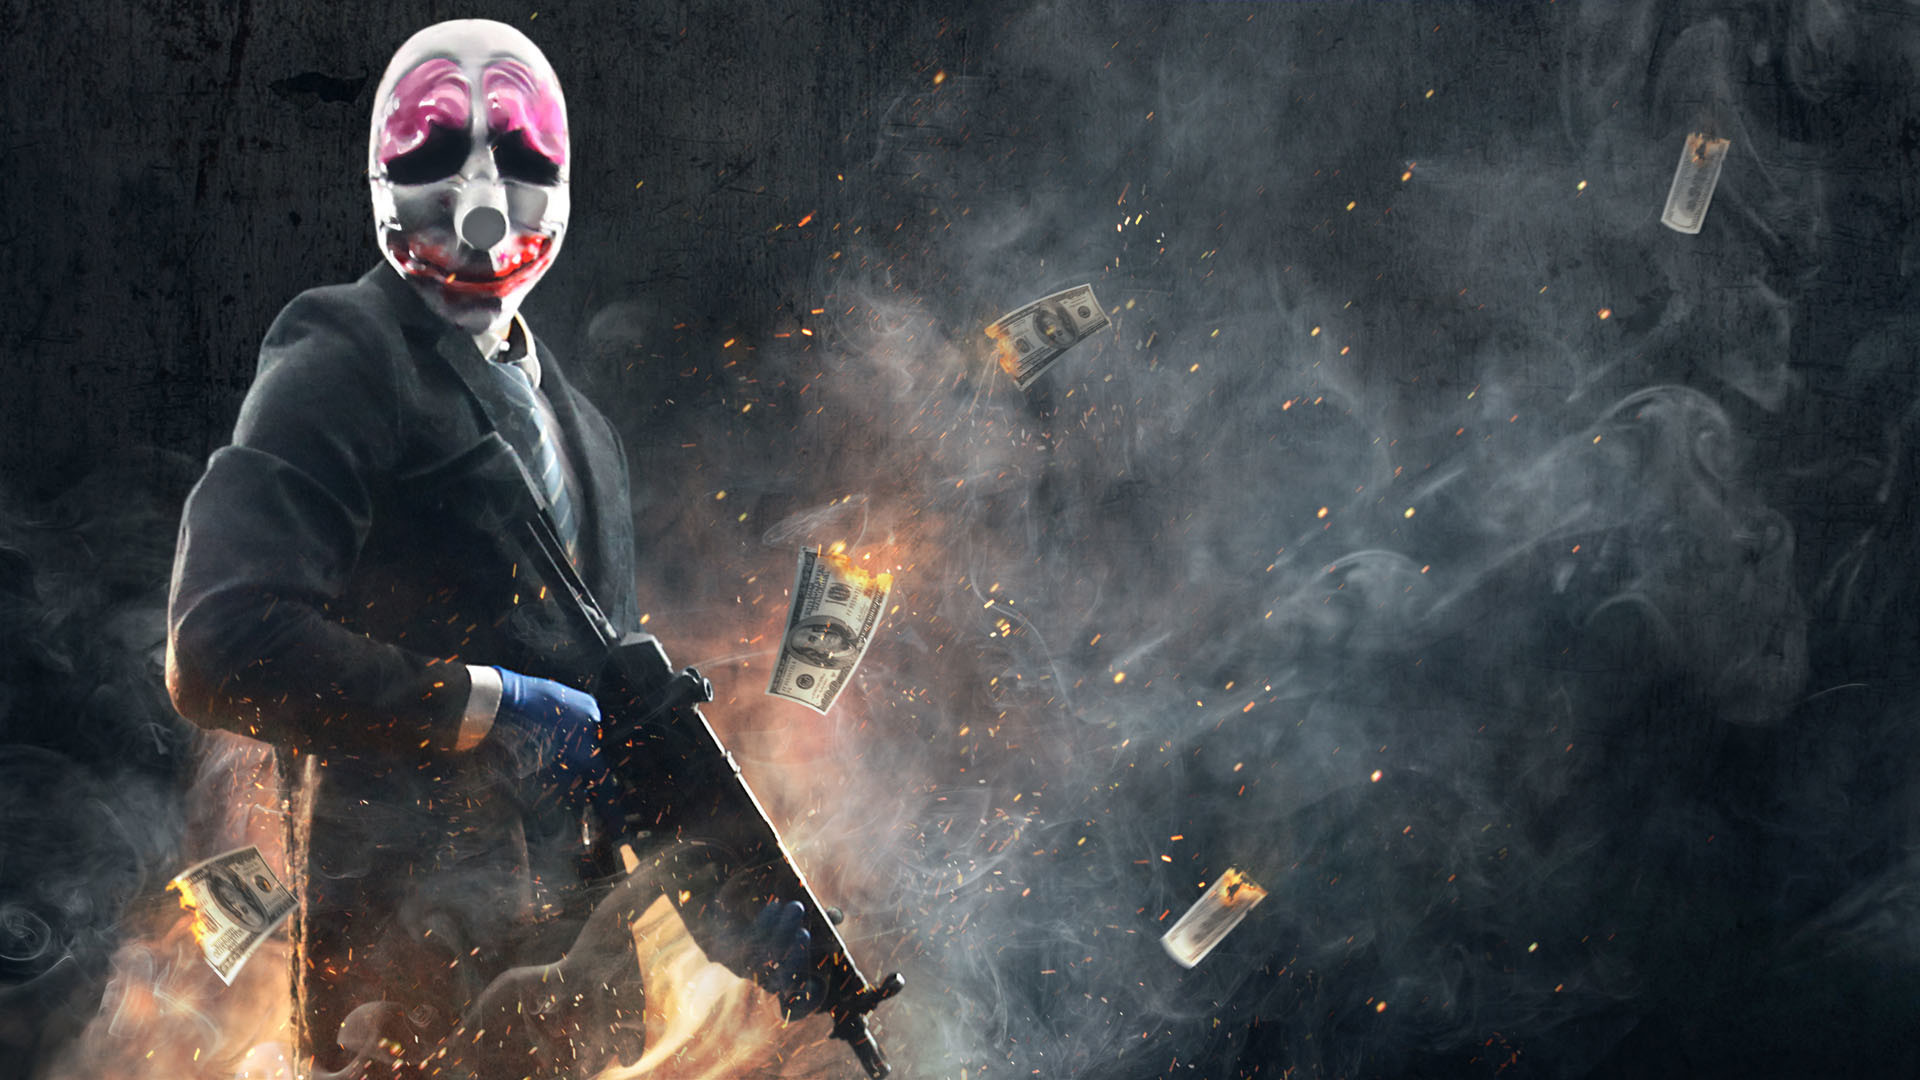 1920x1080 Video Game - Payday 2 Houston (Payday) Wallpaper